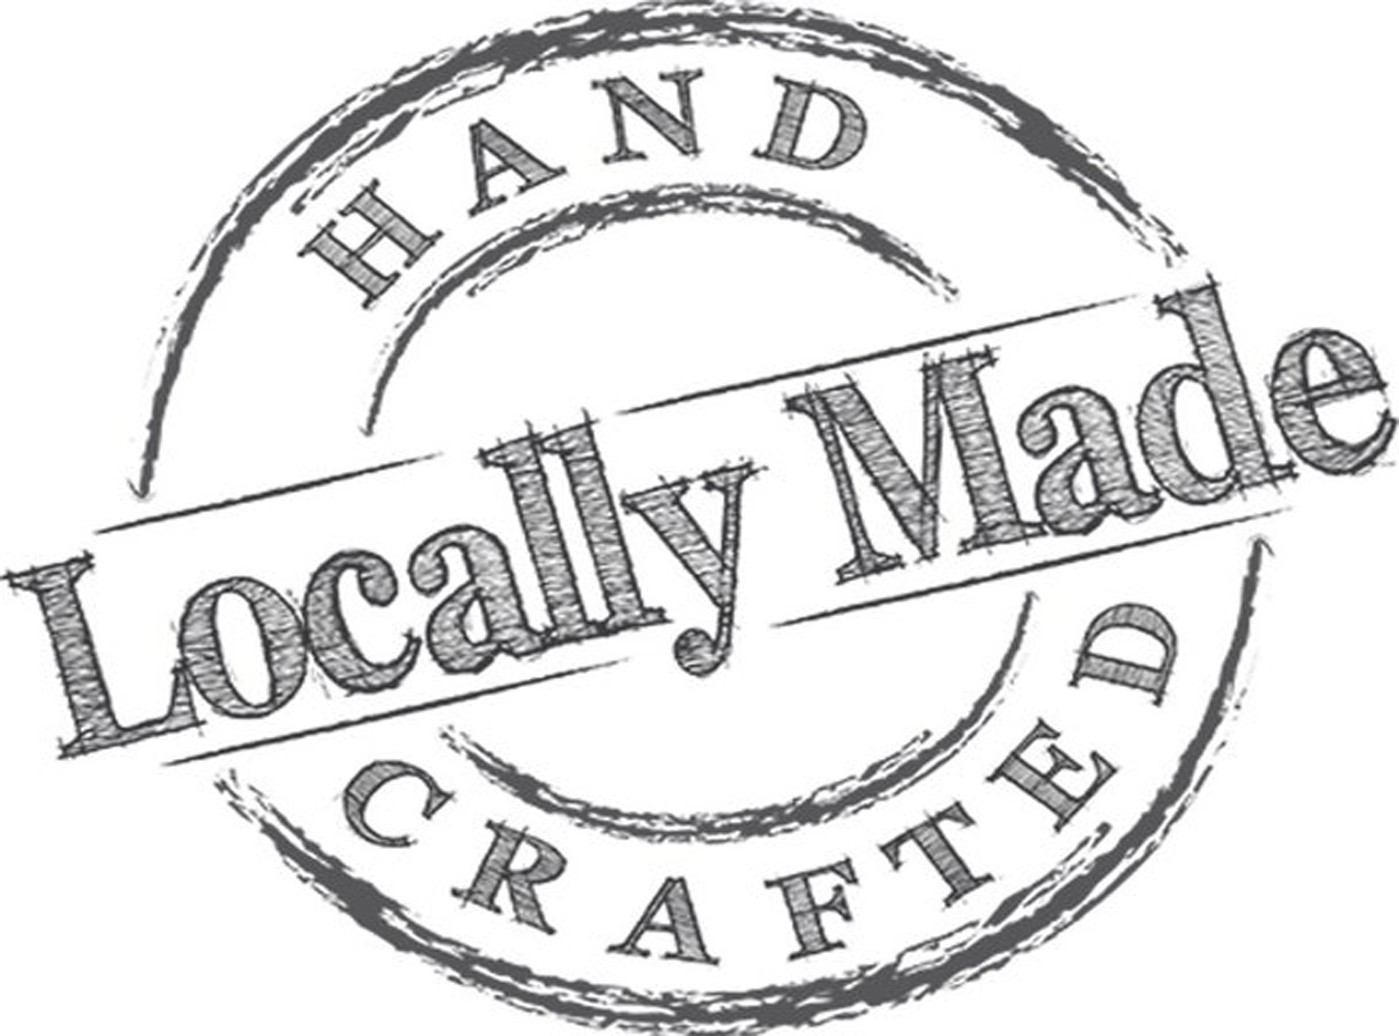 locally made hand crafted